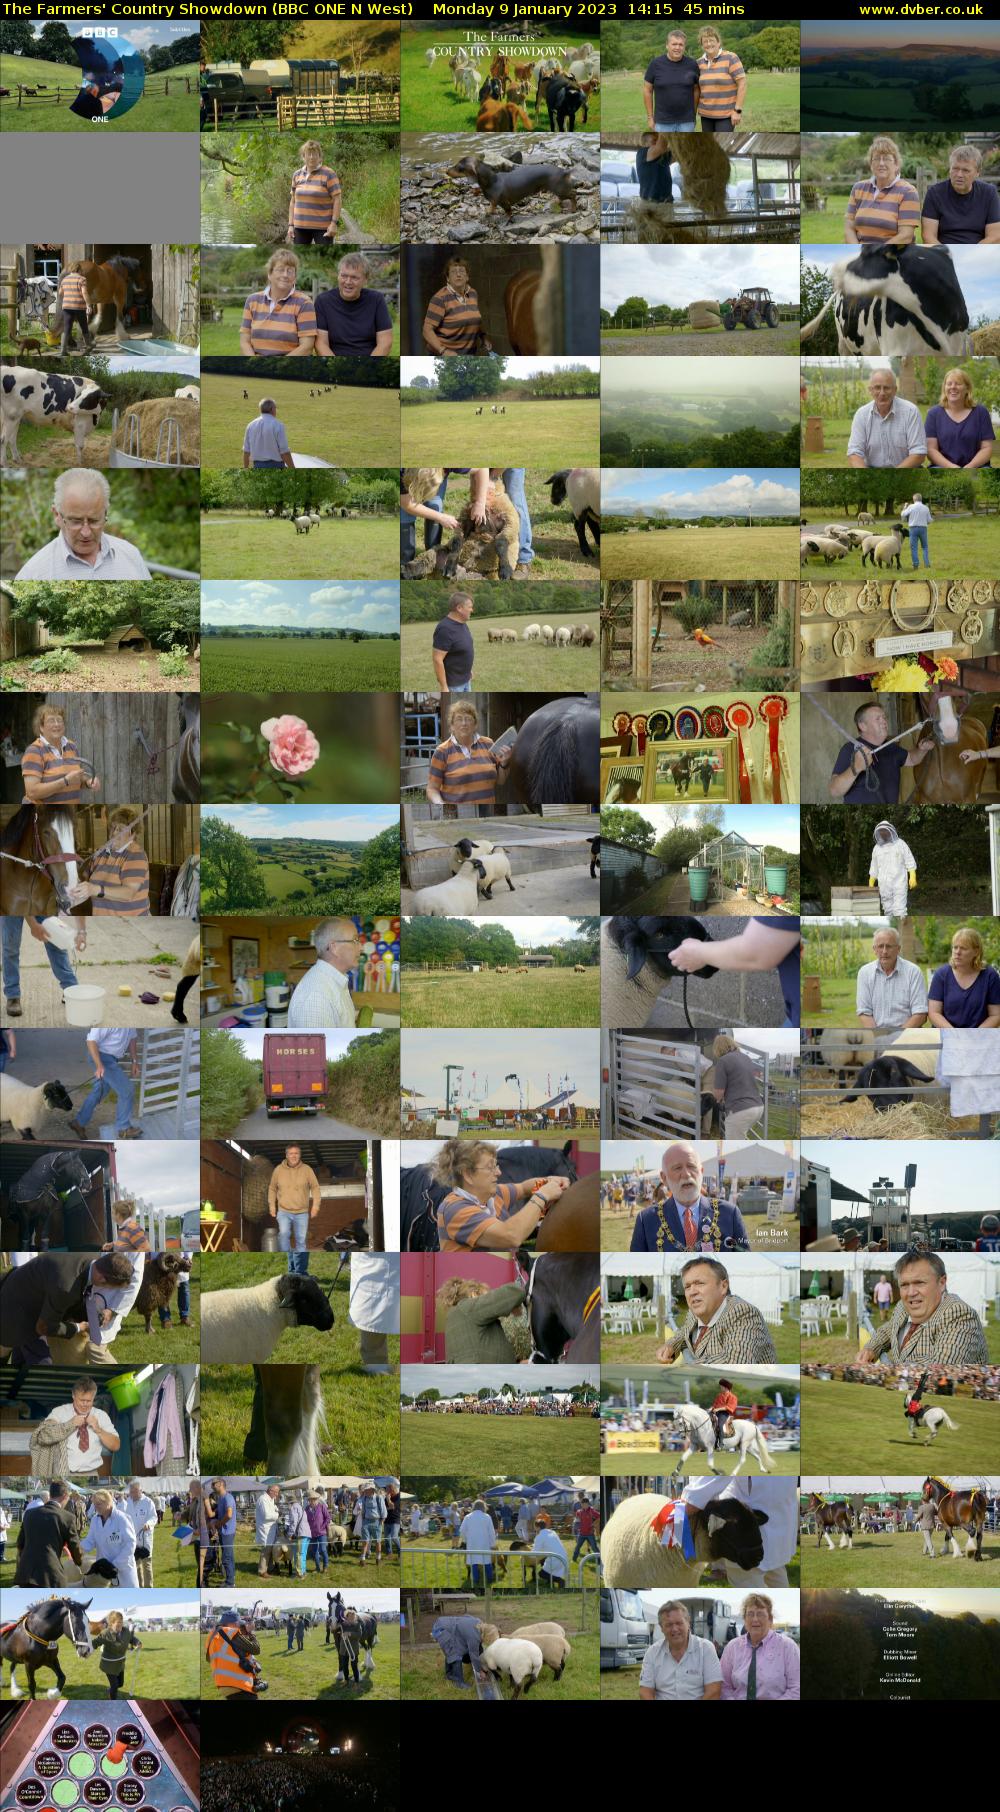 The Farmers' Country Showdown (BBC ONE N West) Monday 9 January 2023 14:15 - 15:00